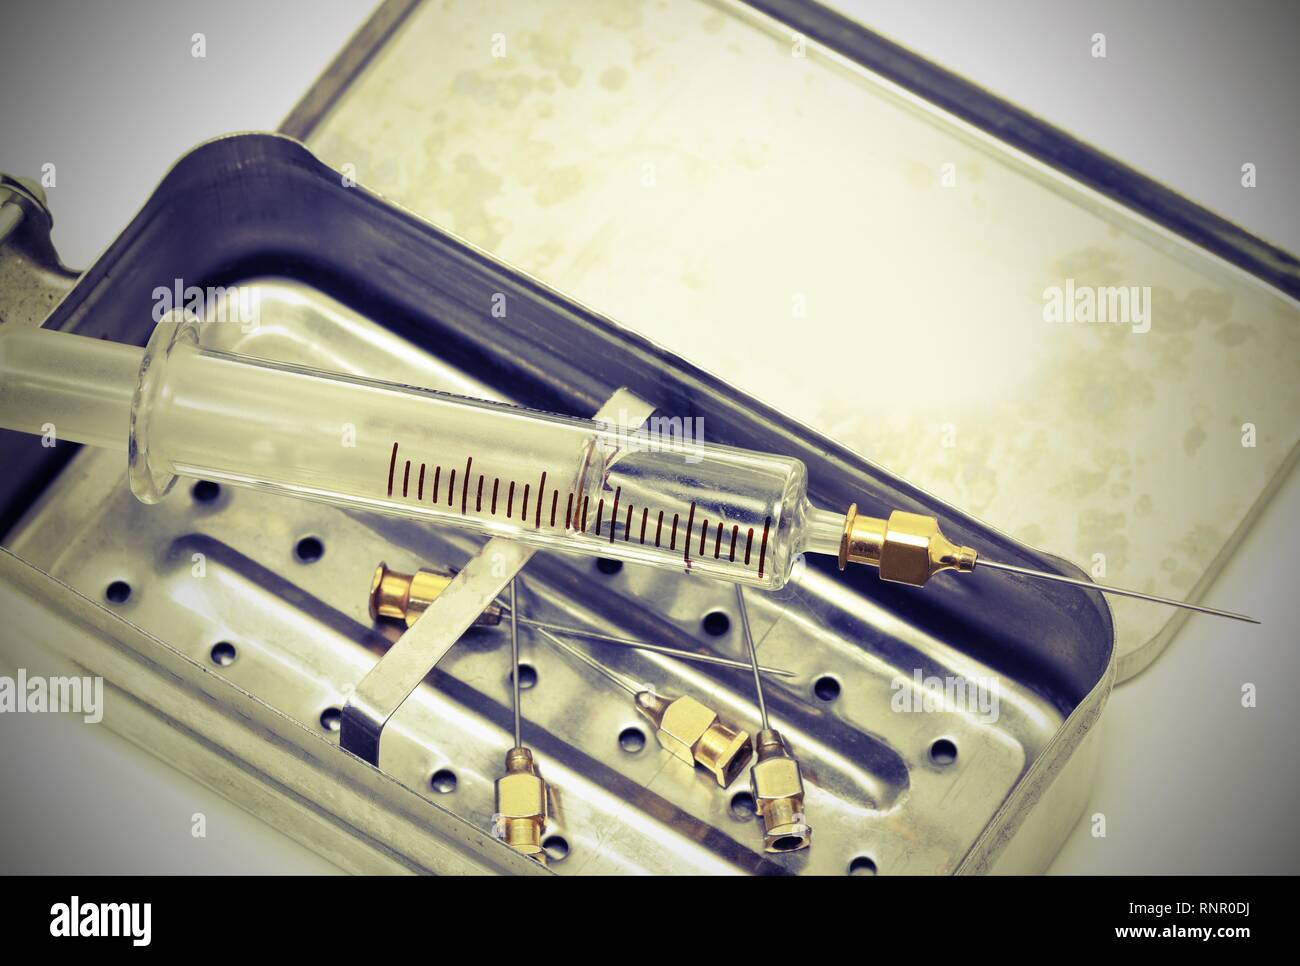 very old syringe in glass material and the vintage toned effect with metal case and more neddles Stock Photo